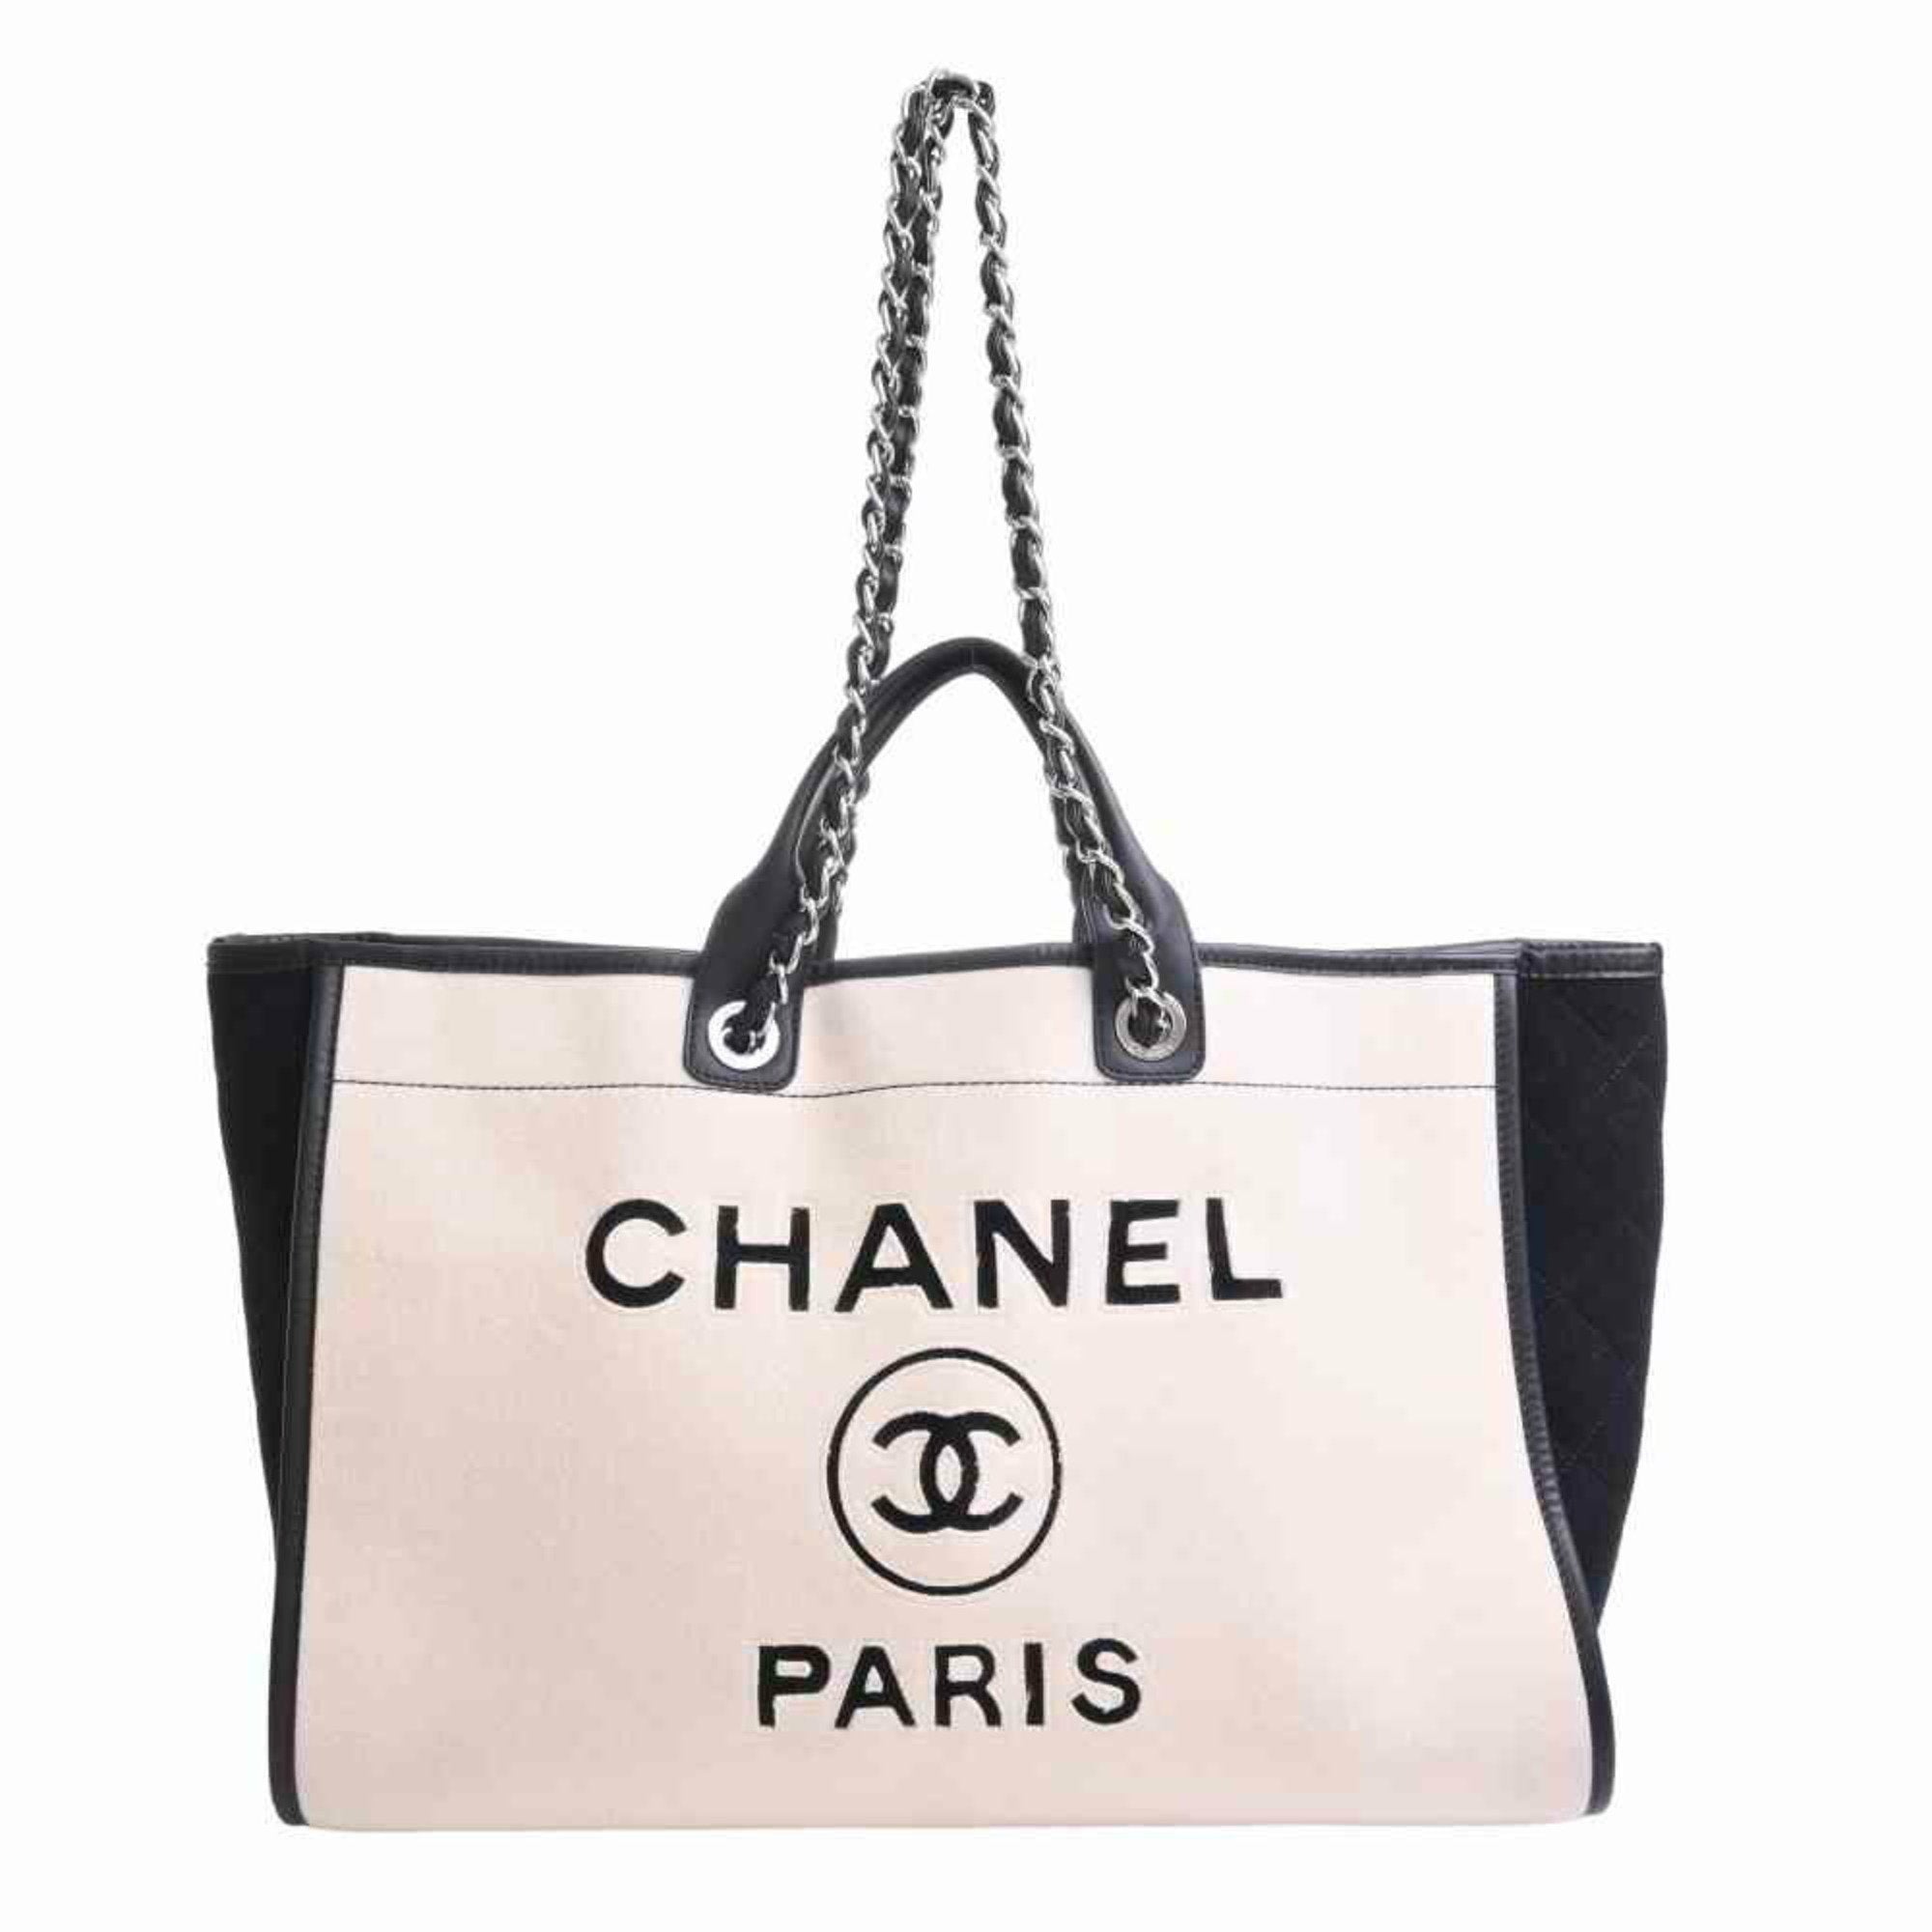 CHANEL Wool Felt Large Deauville Shopping Tote